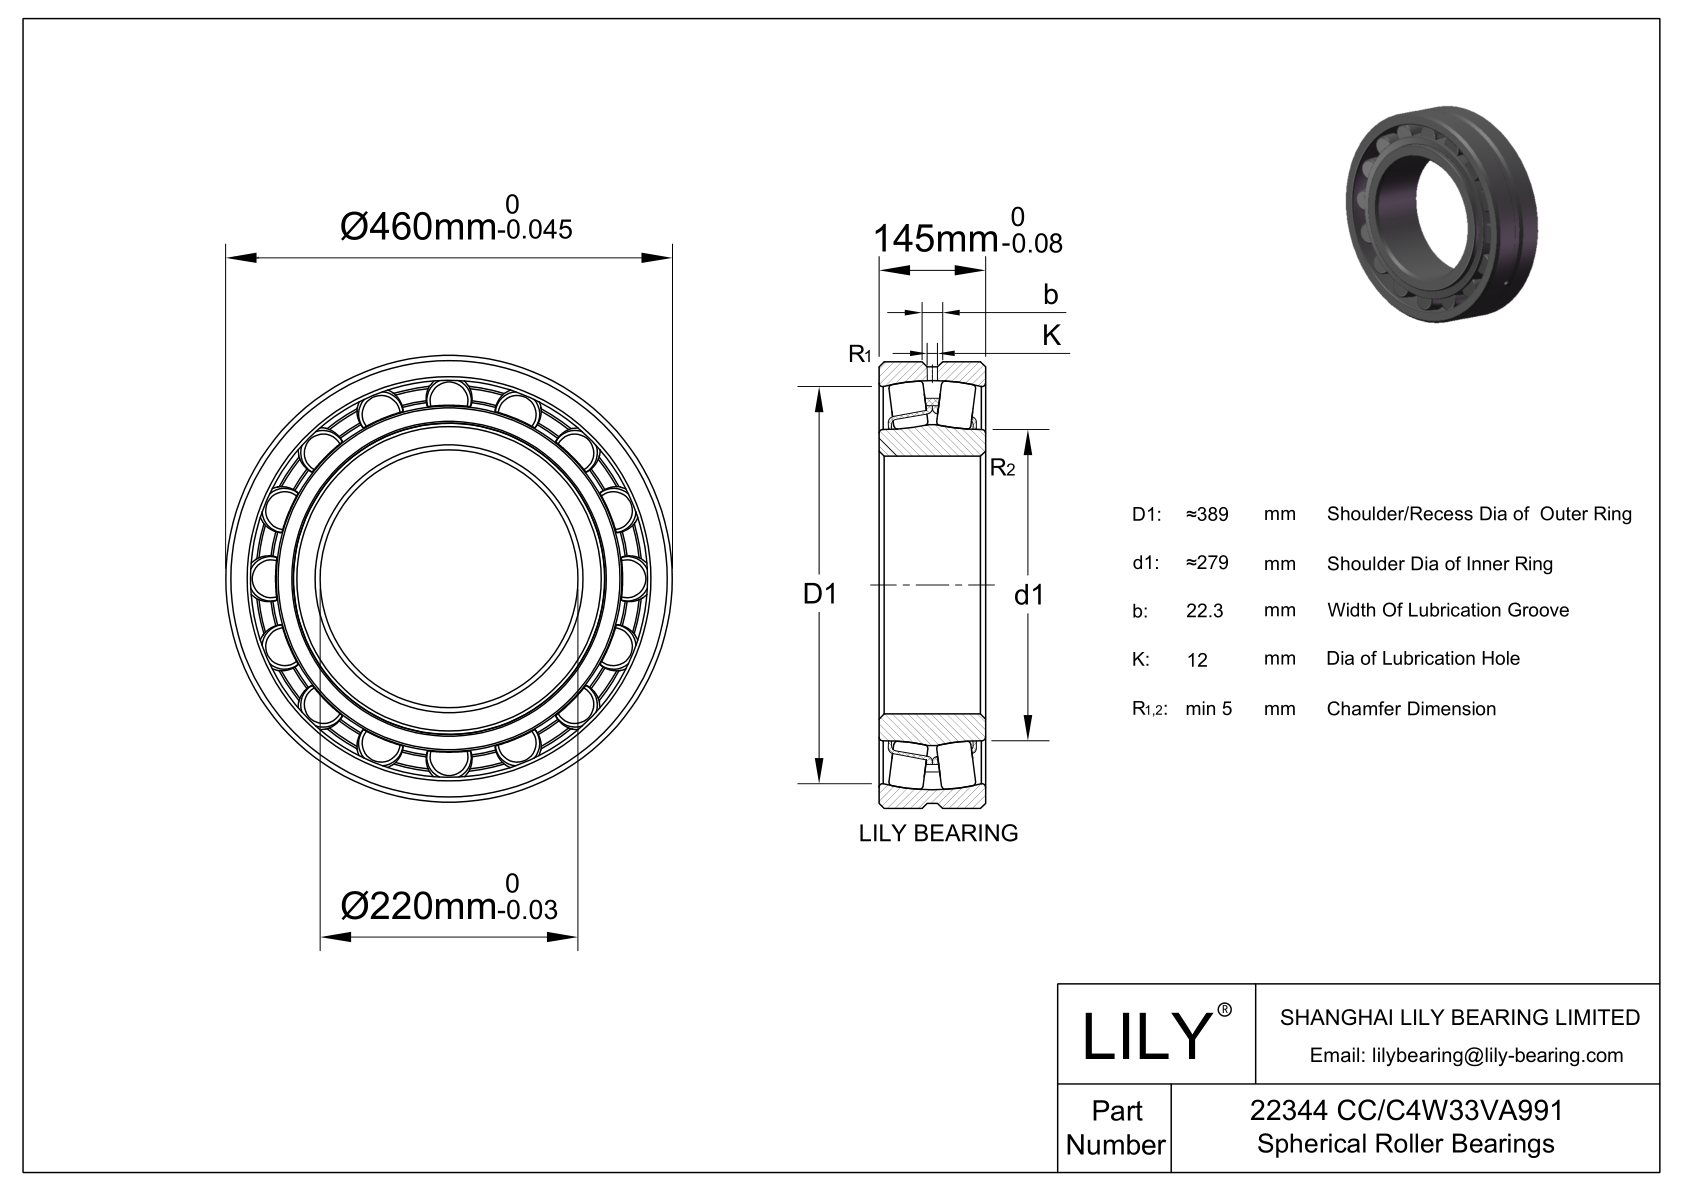 22344 CC/C4W33VA991 Double Row Spherical Roller Bearing cad drawing